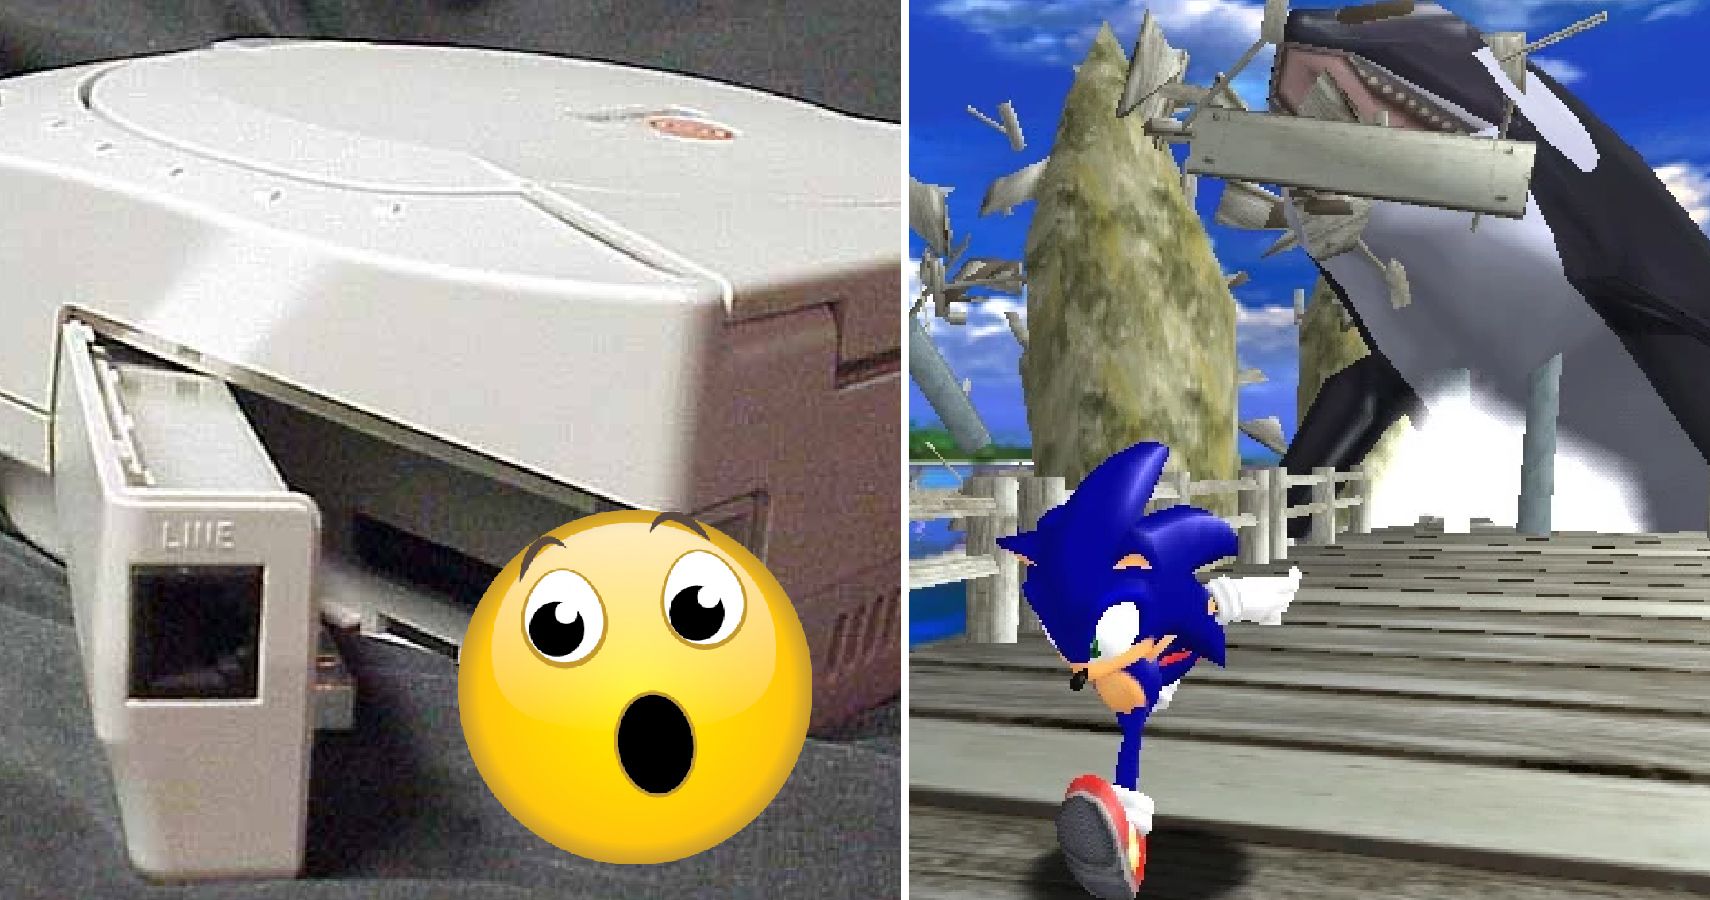 Things You Didn't Know The Dreamcast Could Do